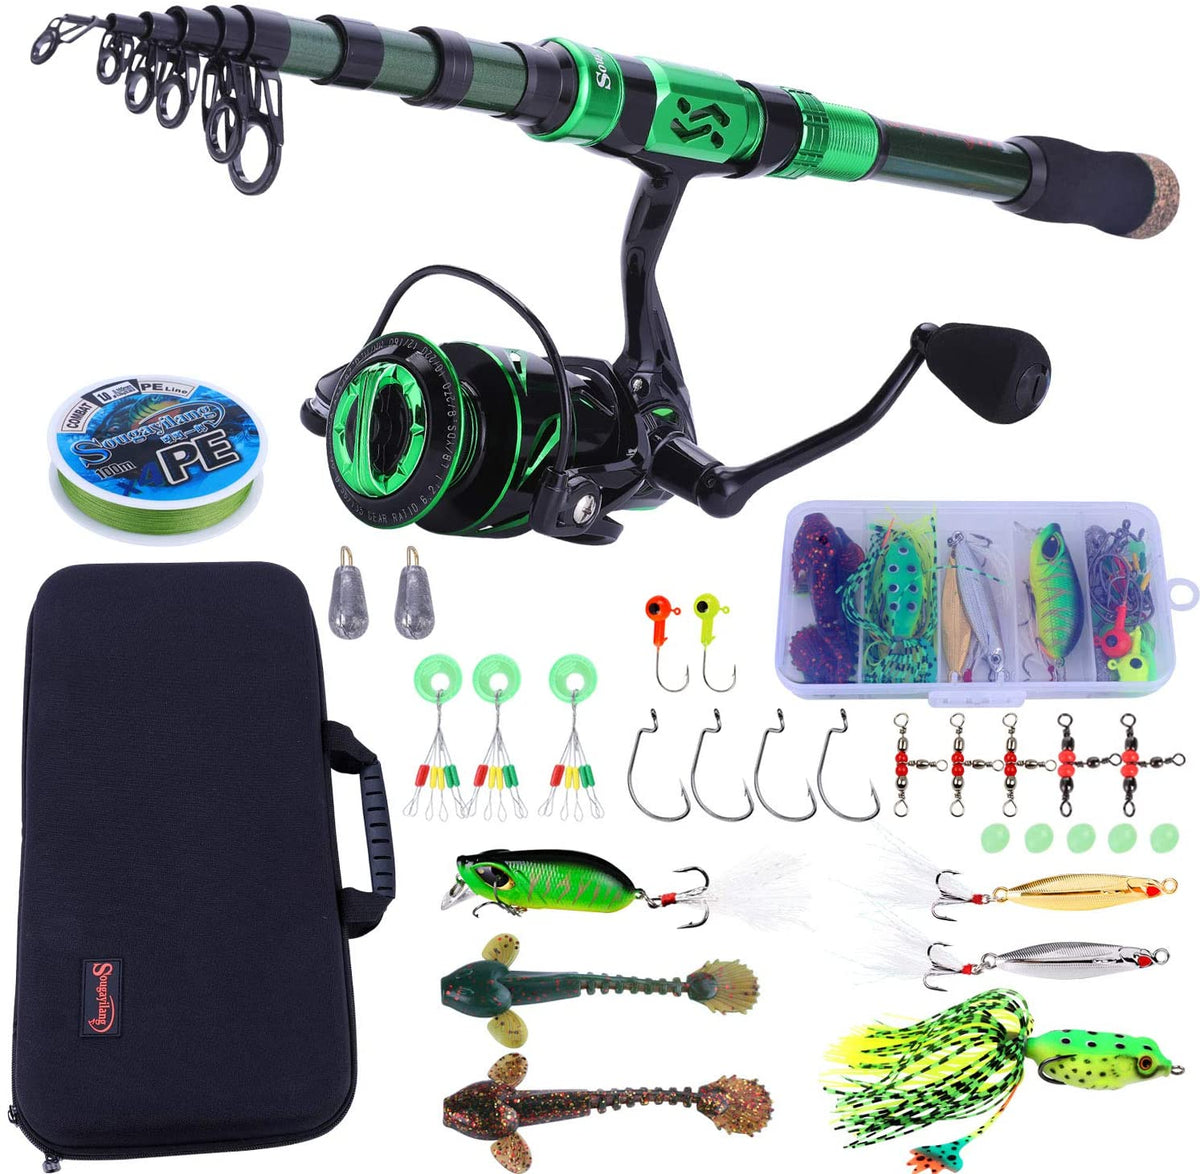 Soothsaying Fishing Rod And Reel Combo Set